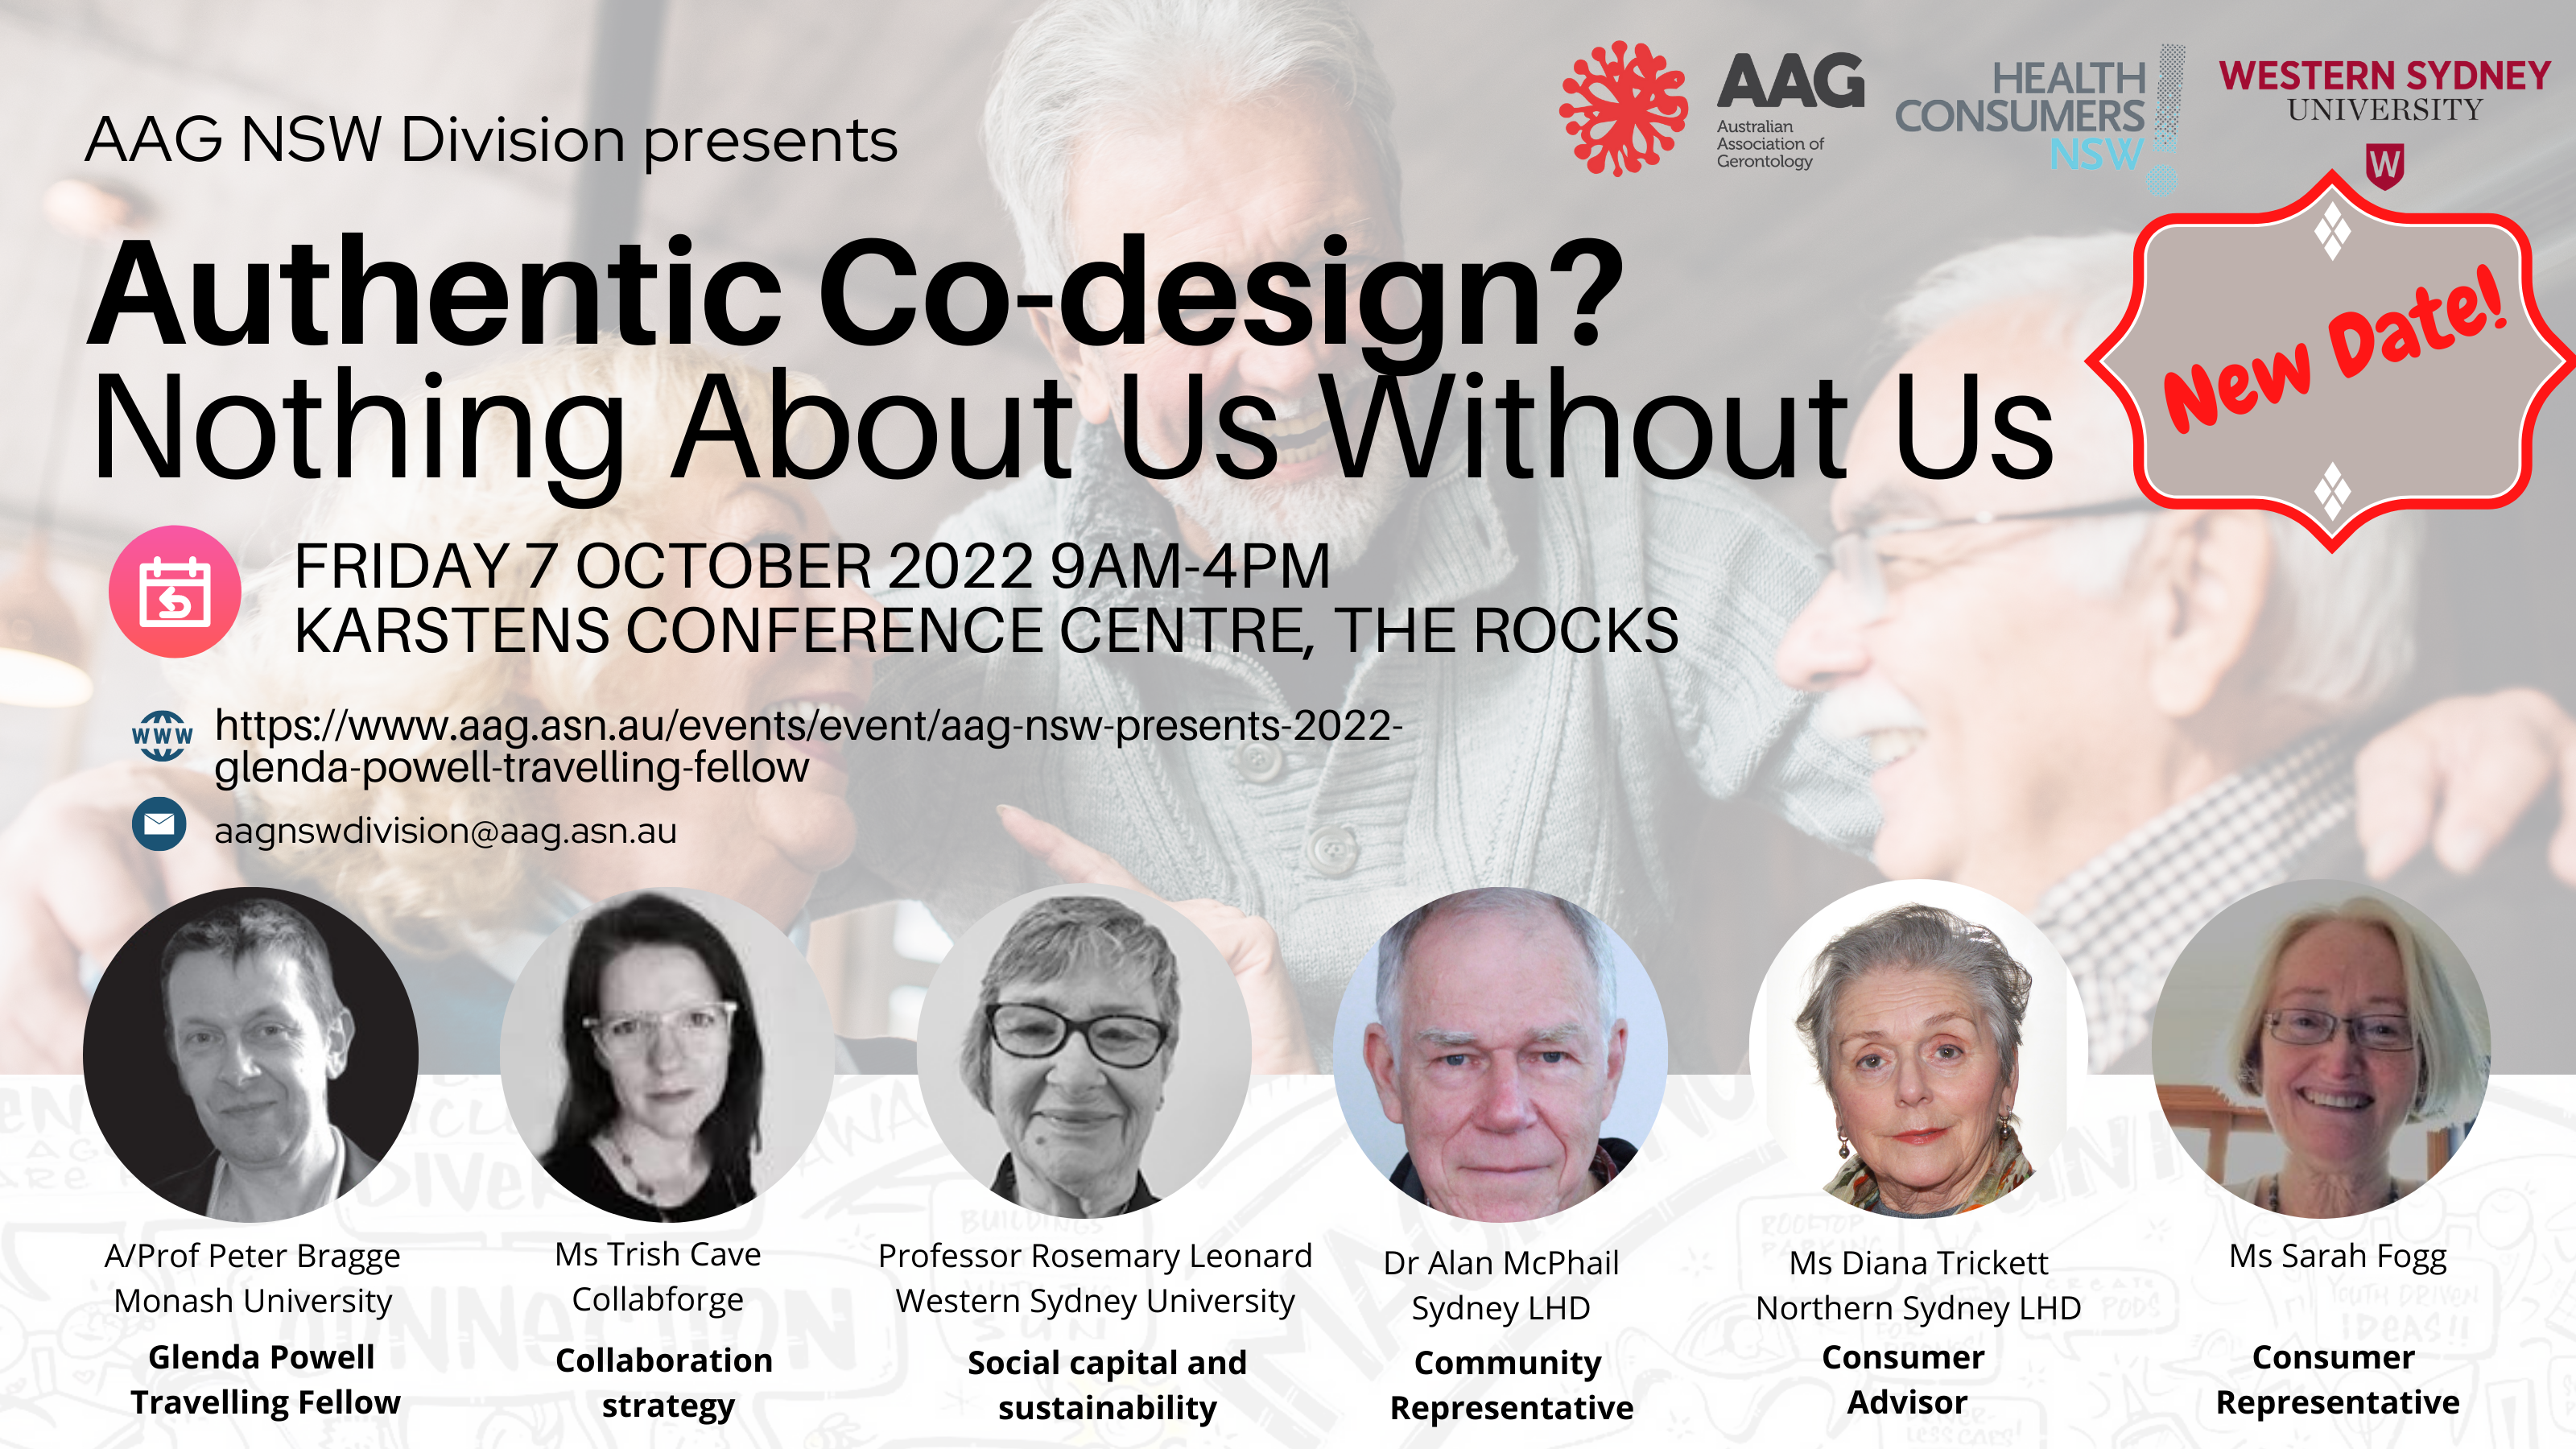 AAG NSW presents: Nothing About us, without us?